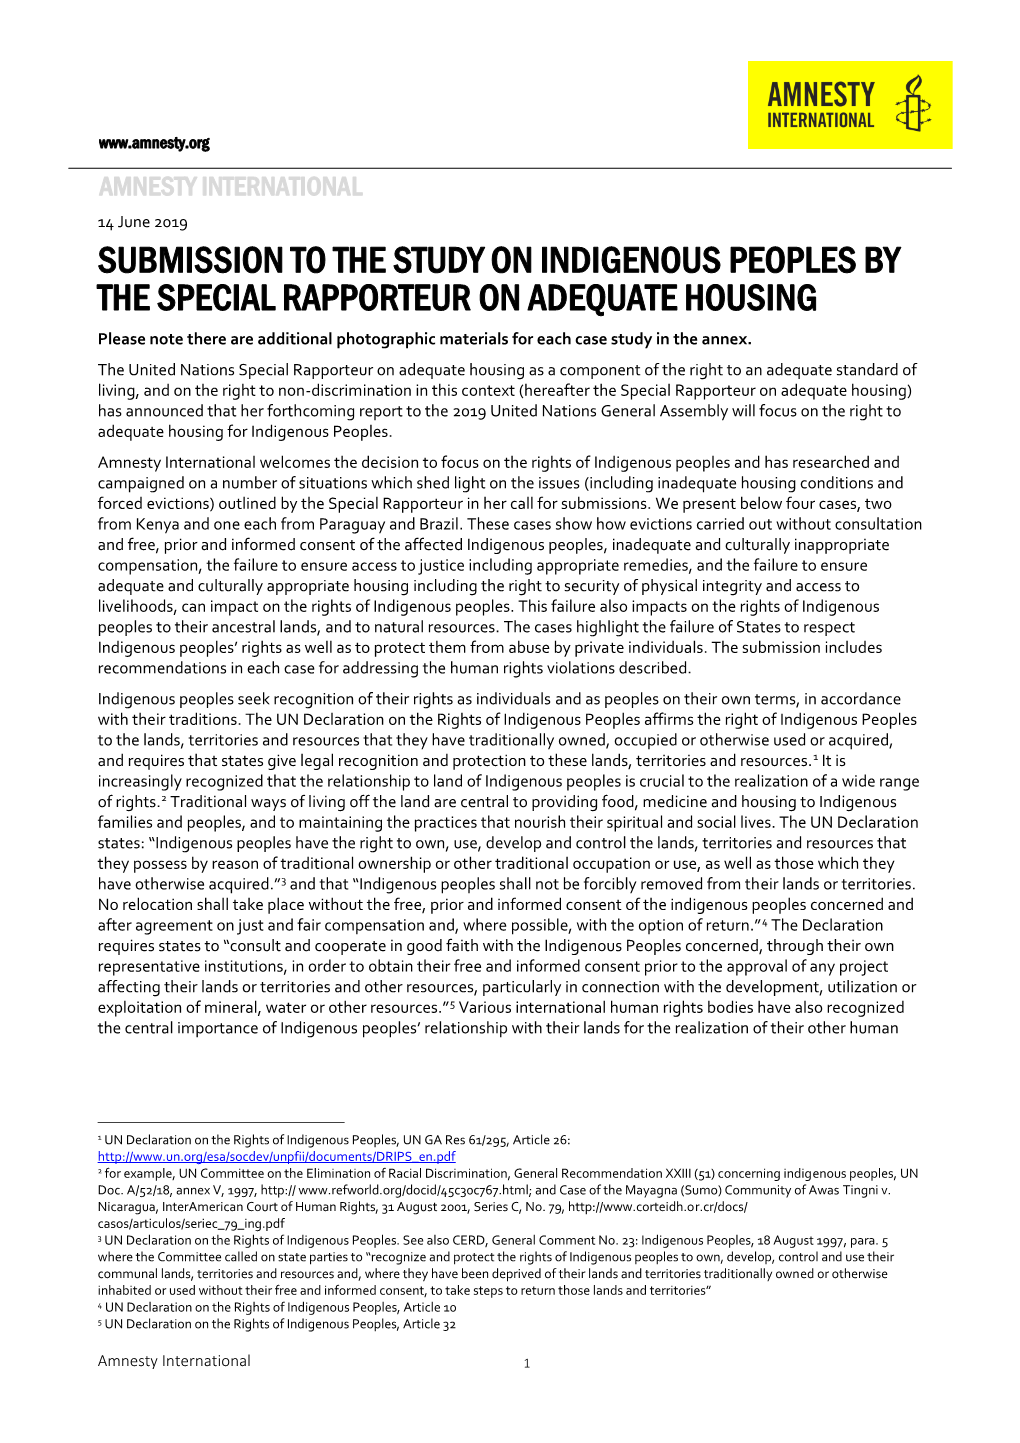 Submission to the Study on Indigenous Peoples by the Special Rapporteur